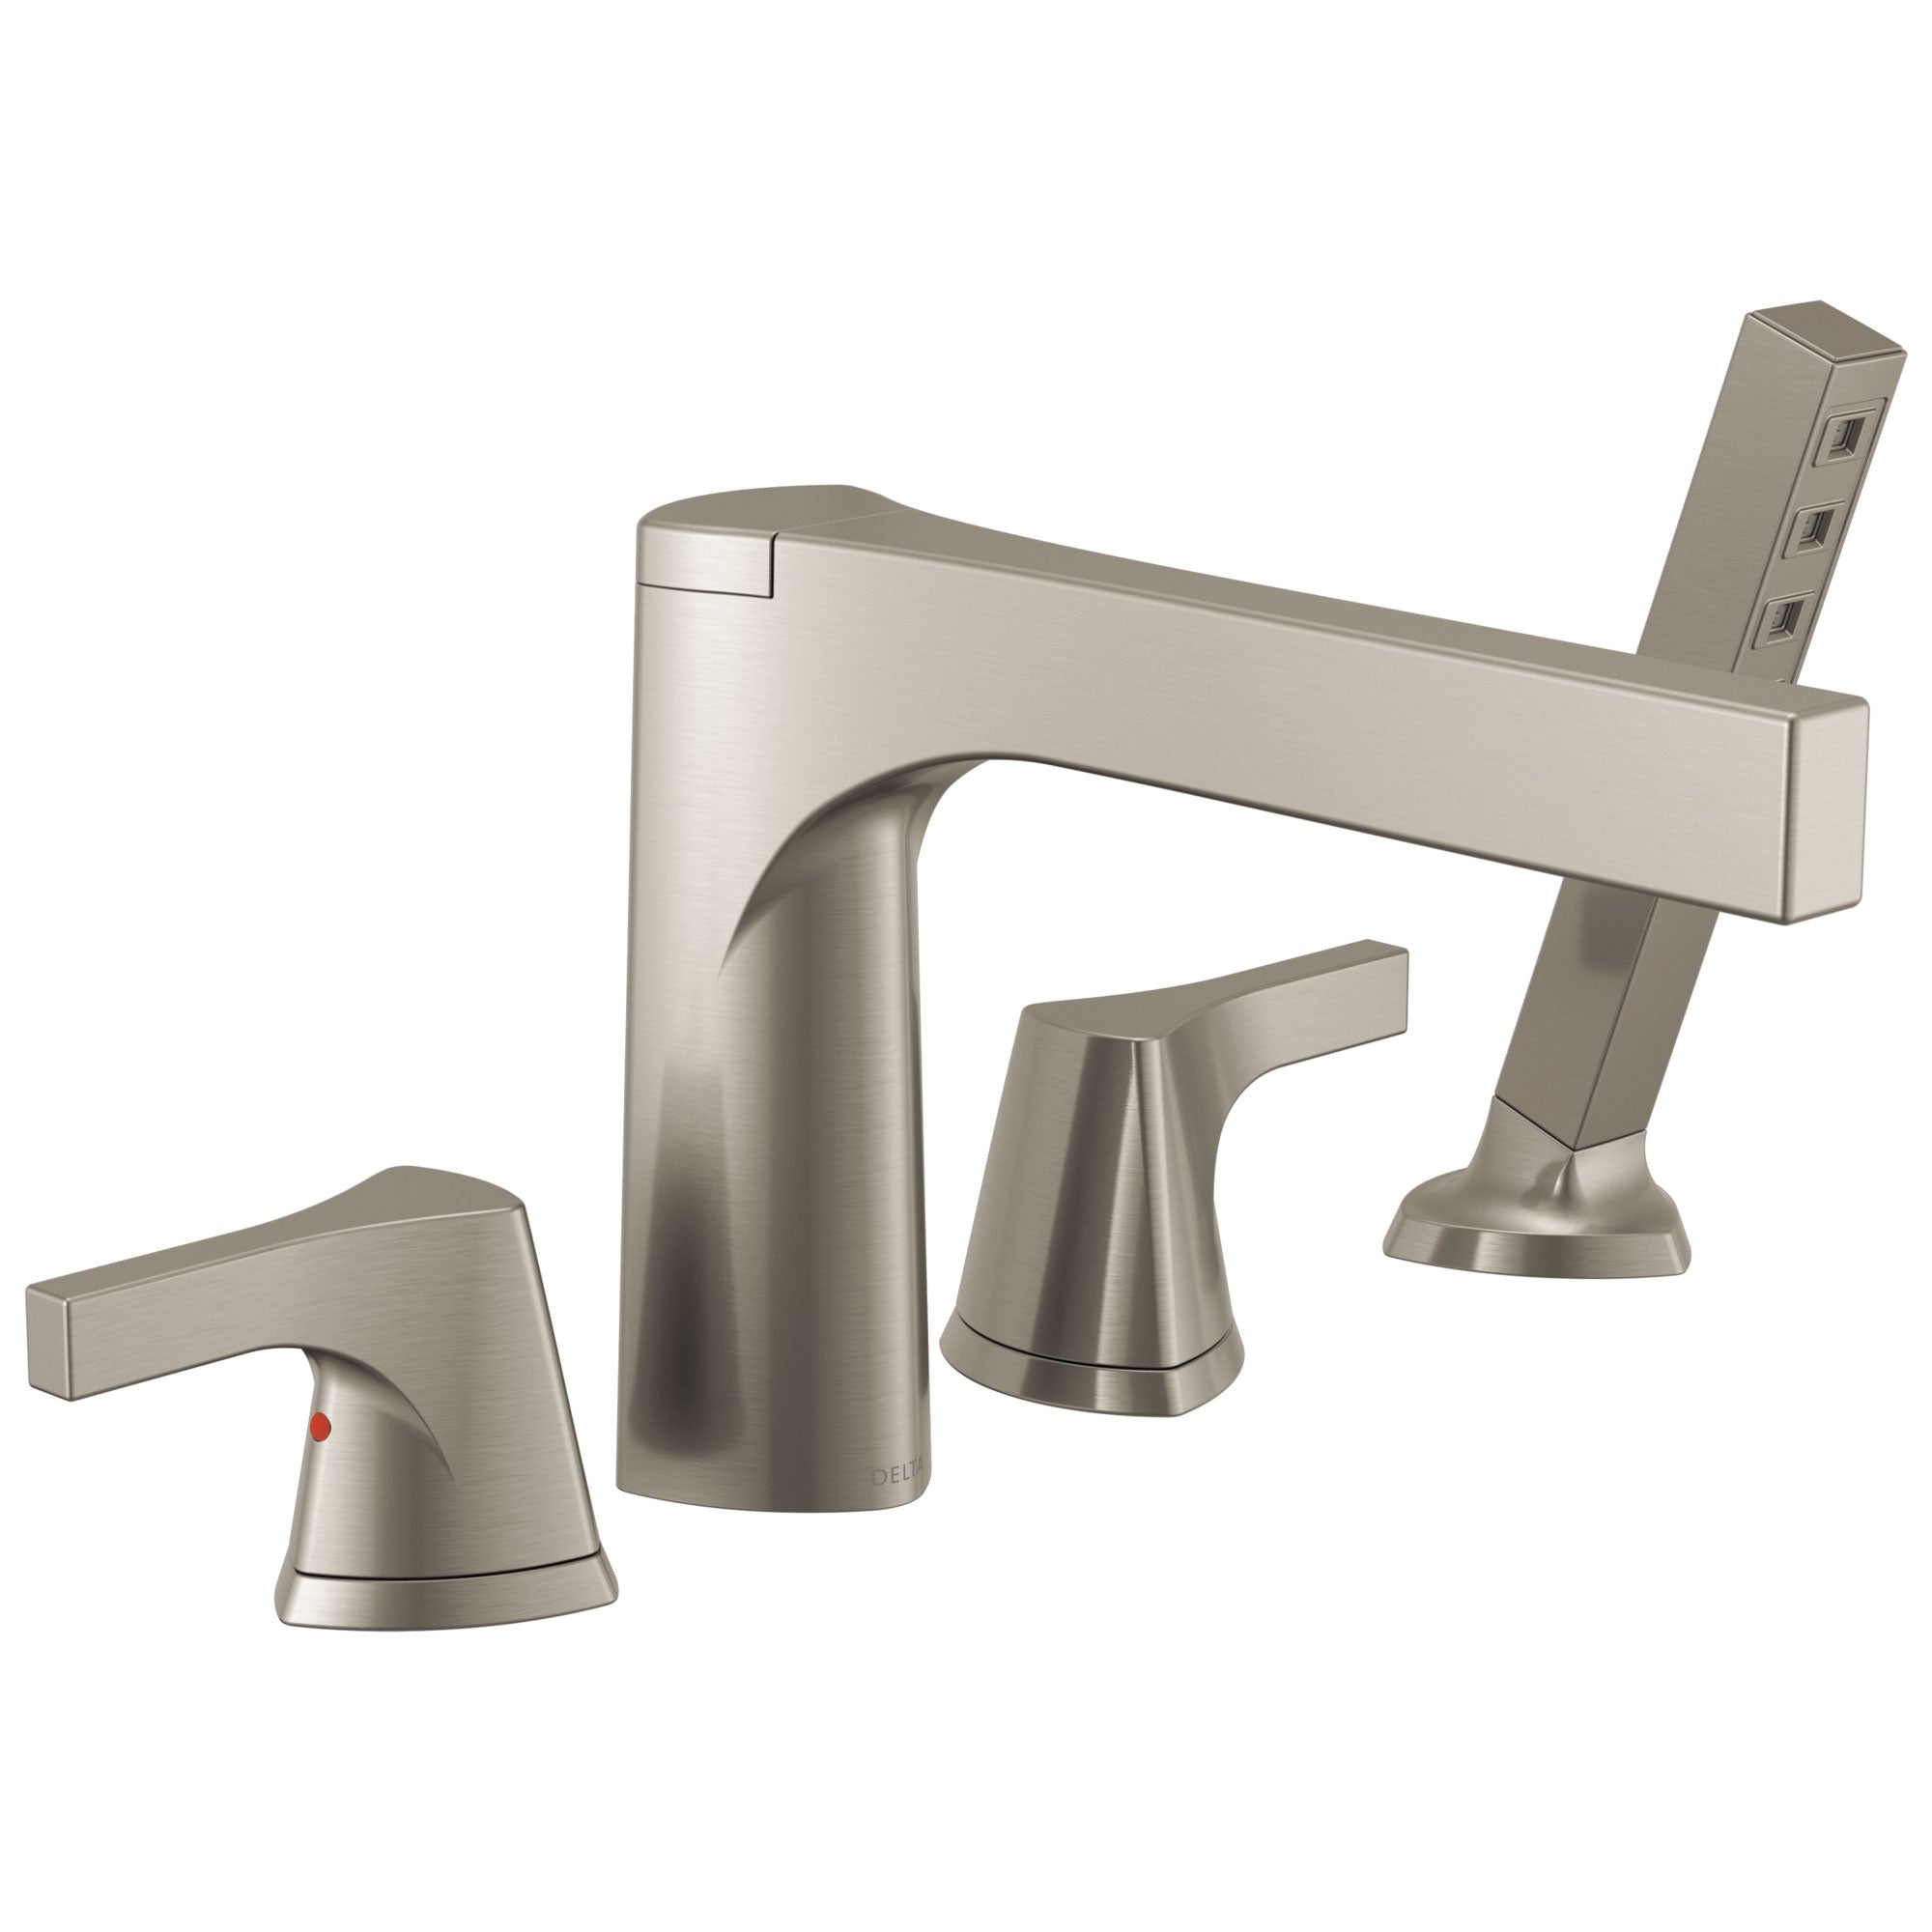 Delta Zura Collection Stainless Steel Finish 4-Hole Roman Tub Filler Faucet with Hand Shower Includes Rough-in Valve D1904V